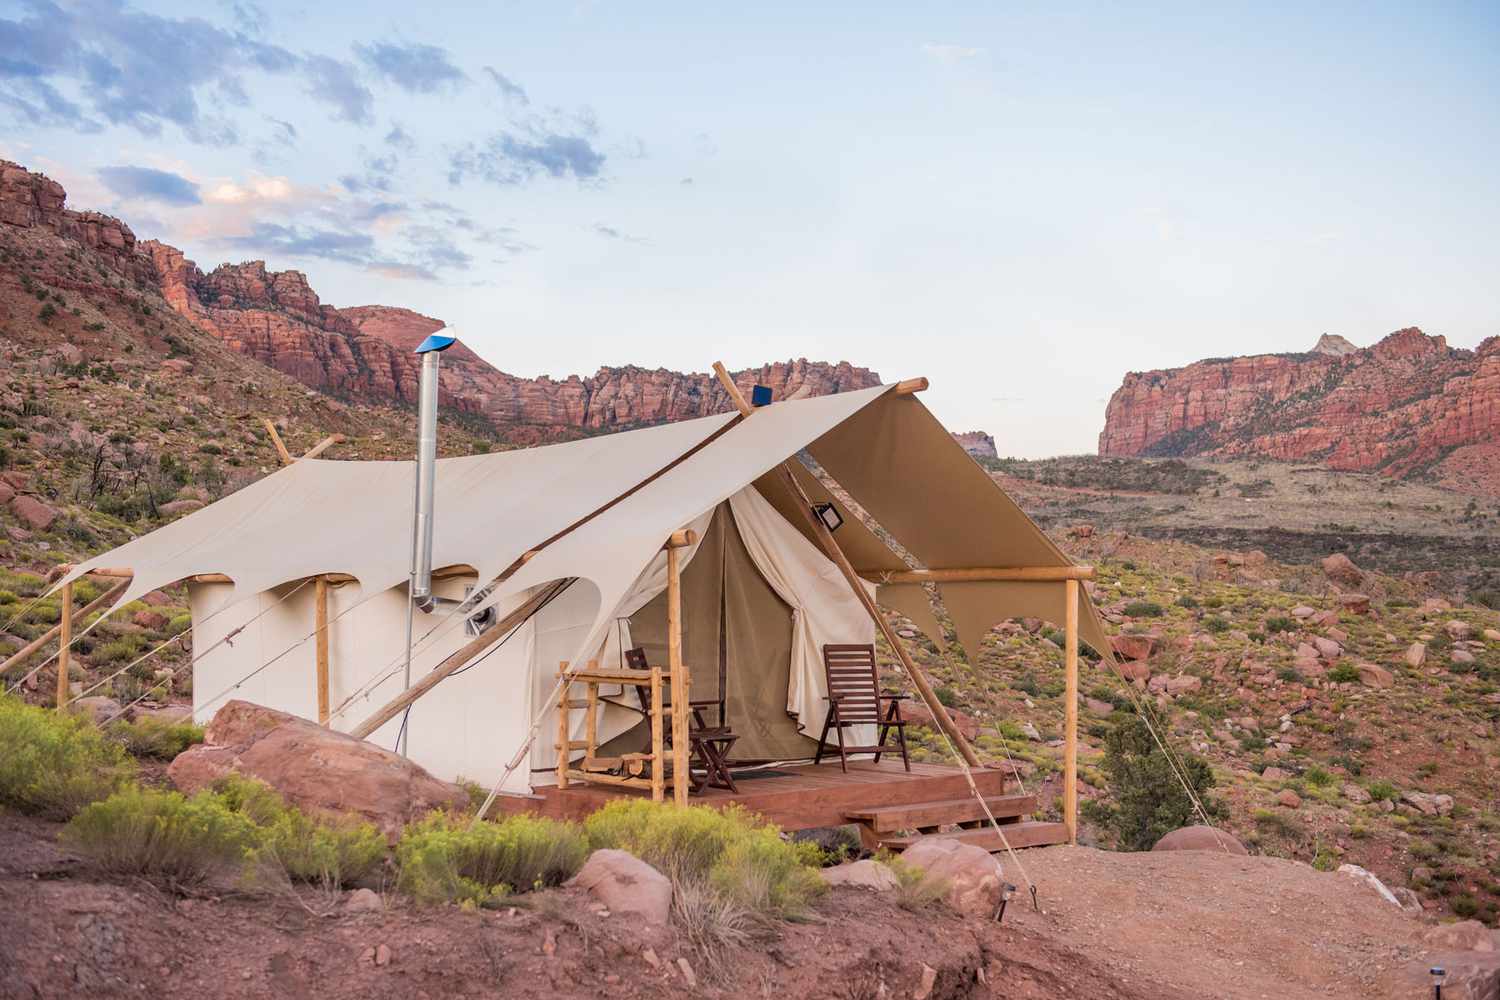 Social Distance Under the Stars With These Stunning Glamping Camps Around the Country